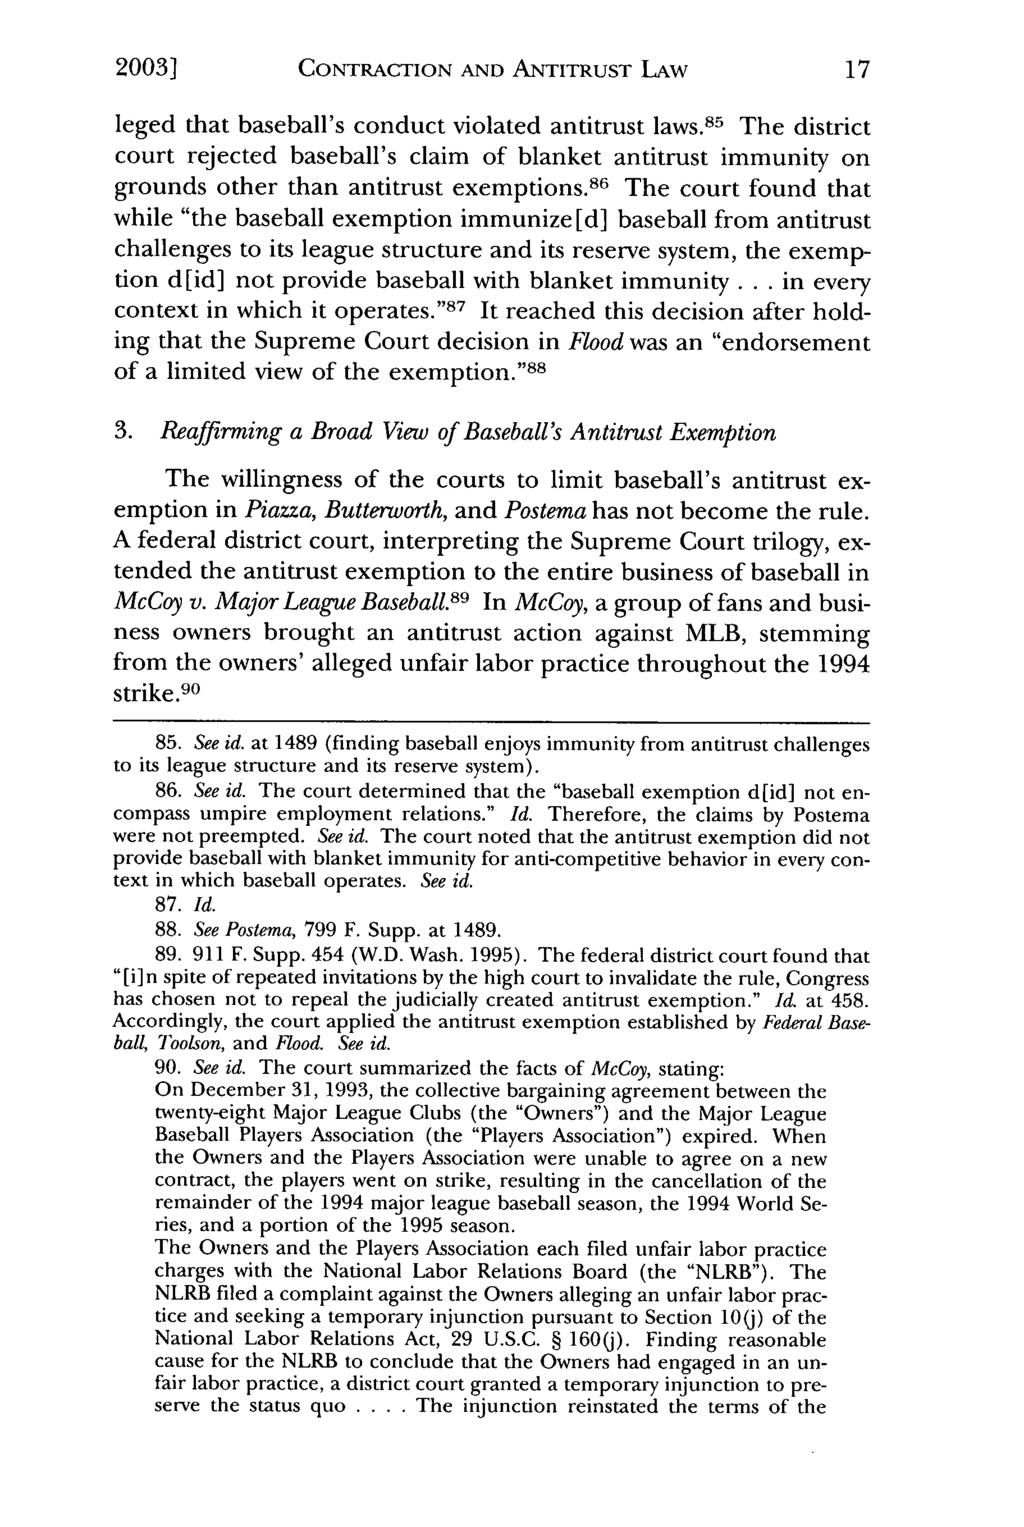 2003] Wolohan: Major League Baseball Contraction and Antitrust Law CONTRACTION AND ANTITRUST LAW leged that baseball's conduct violated antitrust laws.